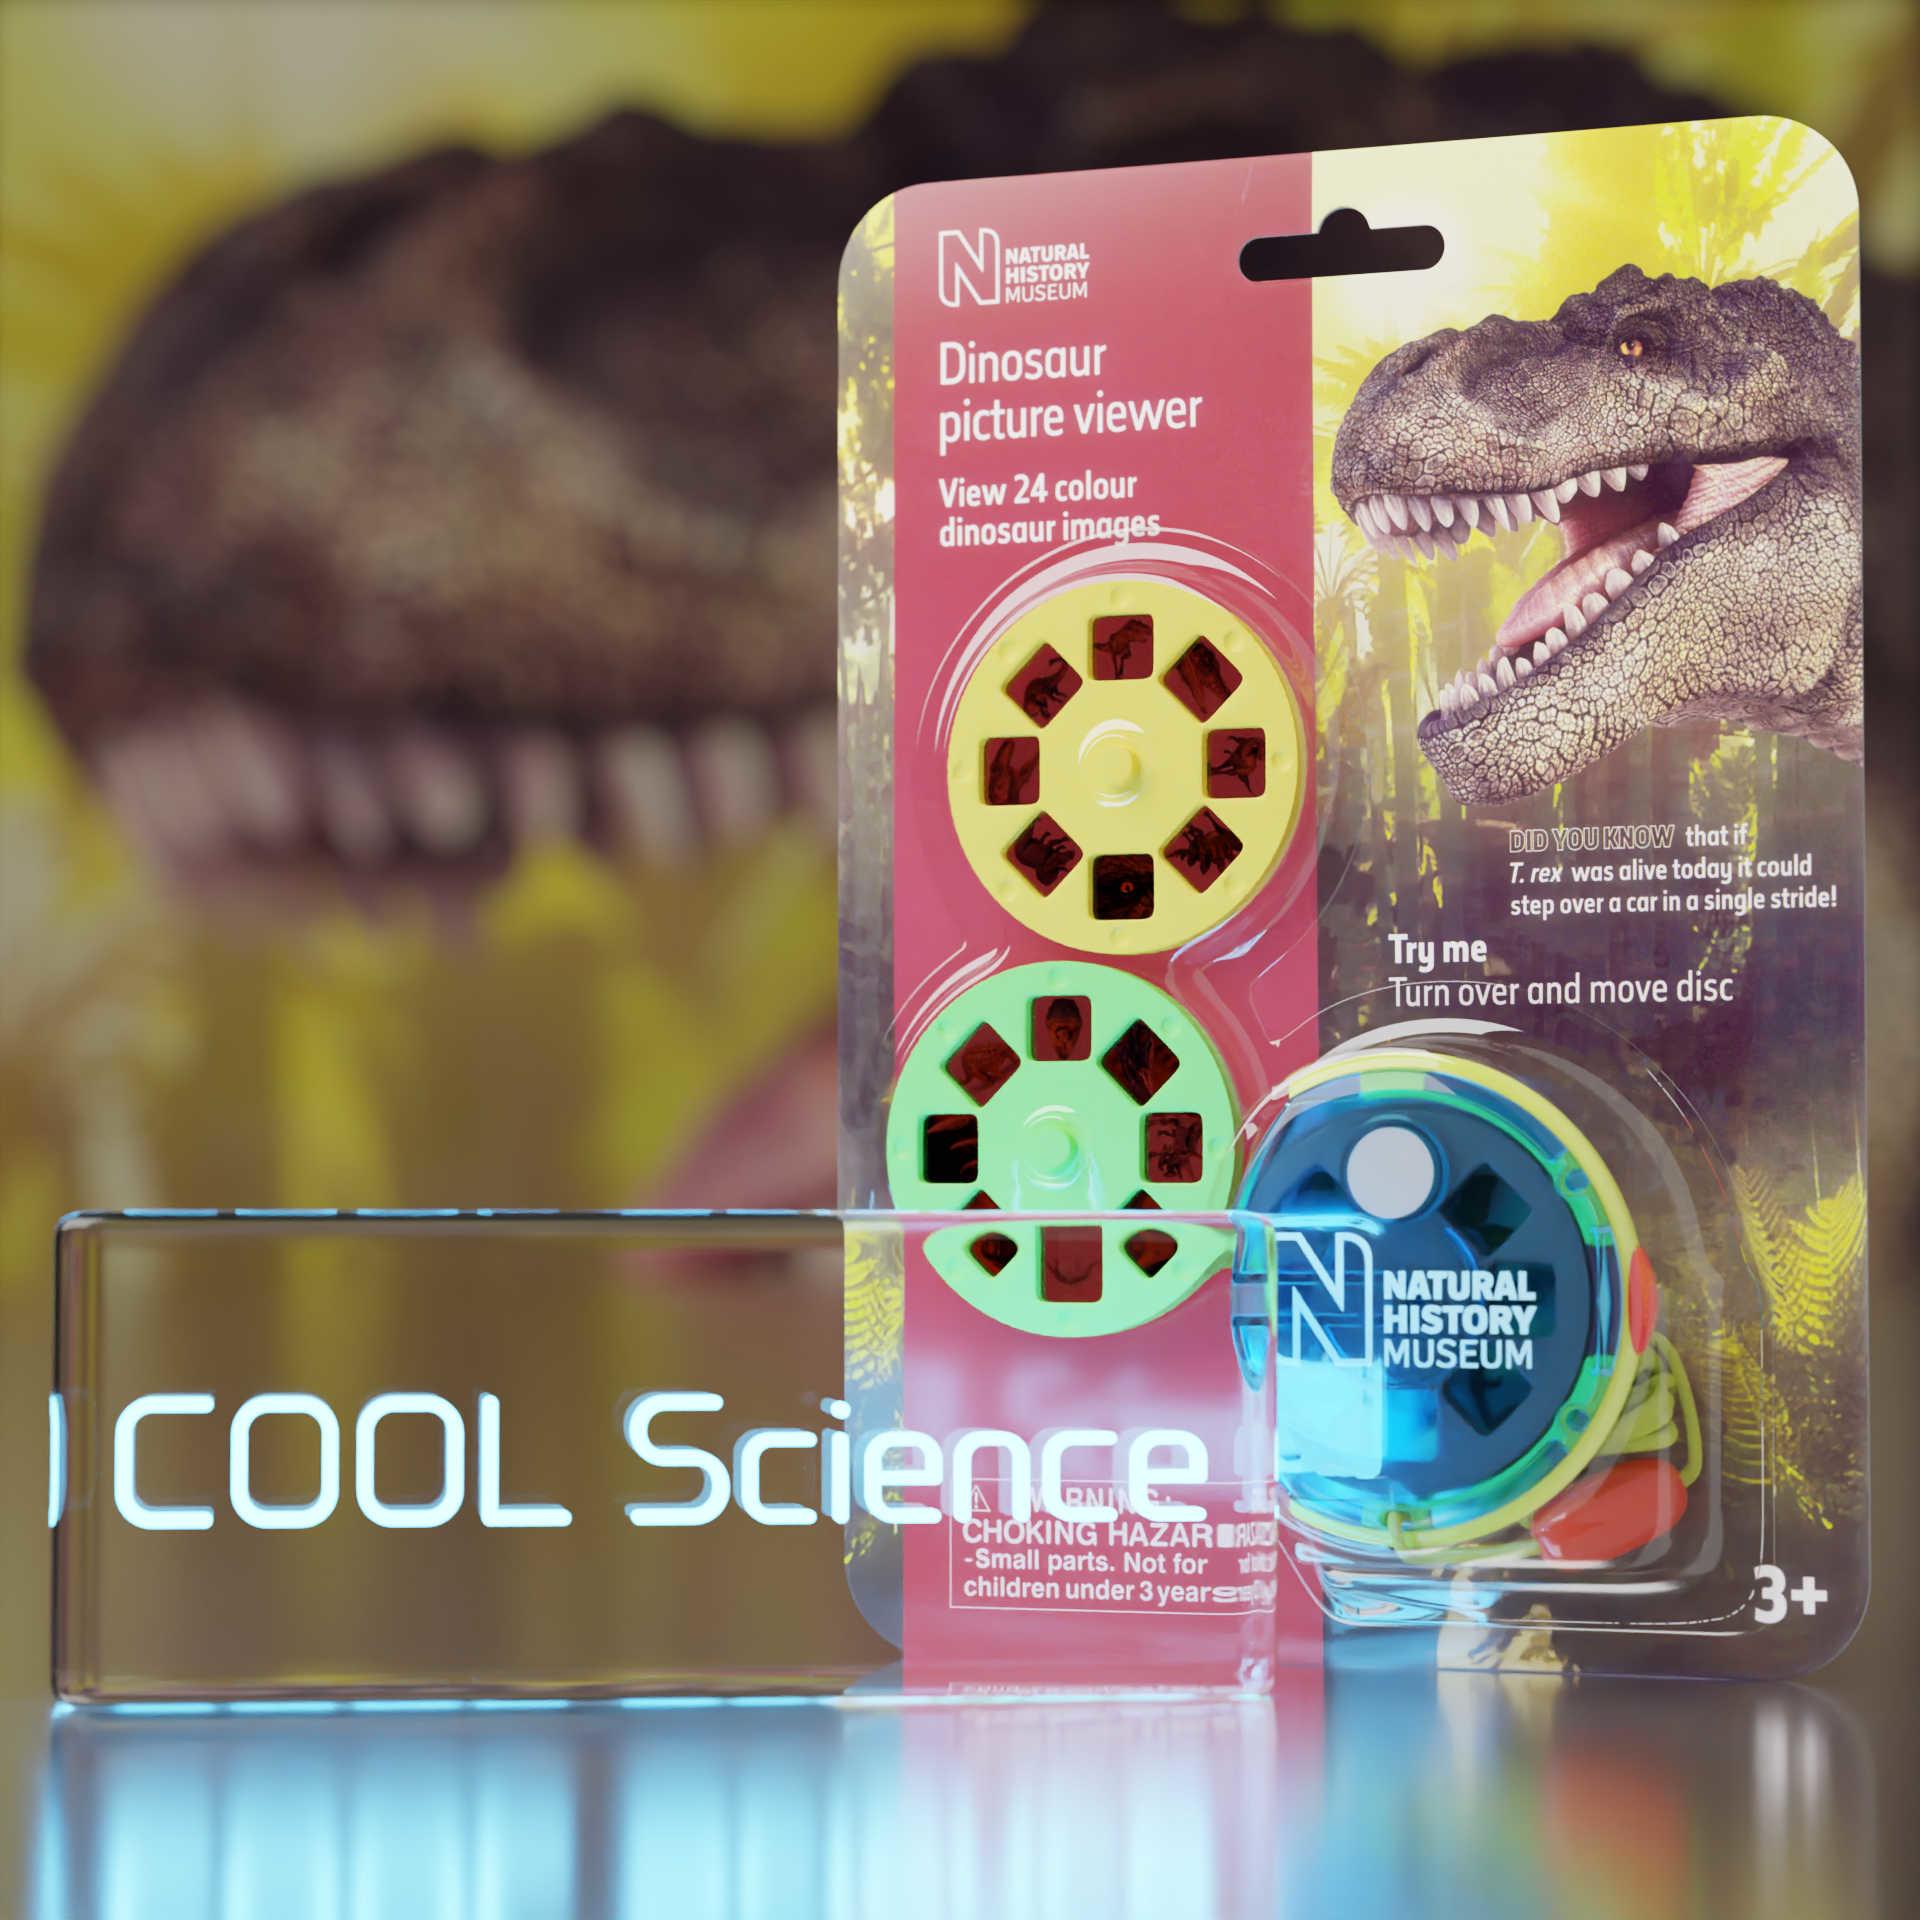 Front View of the Natural History Museum Dinosaur viewer on it’s backing card